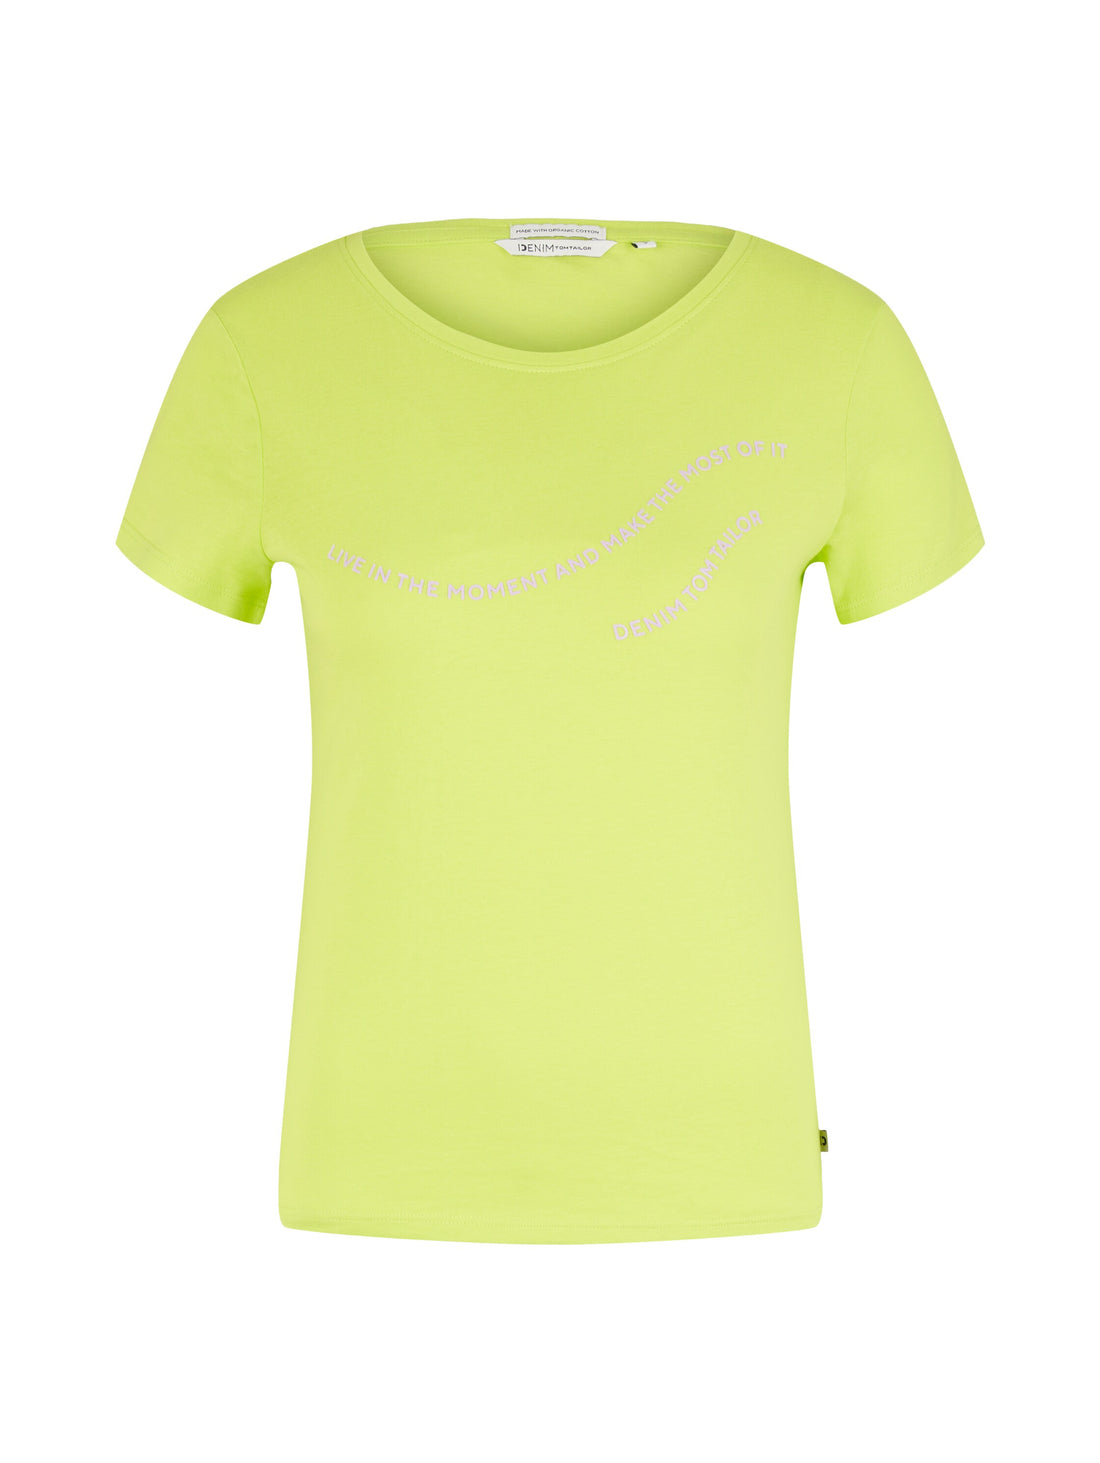 Lime Green Short Sleeve Graphic Crew Neck T-Shirt